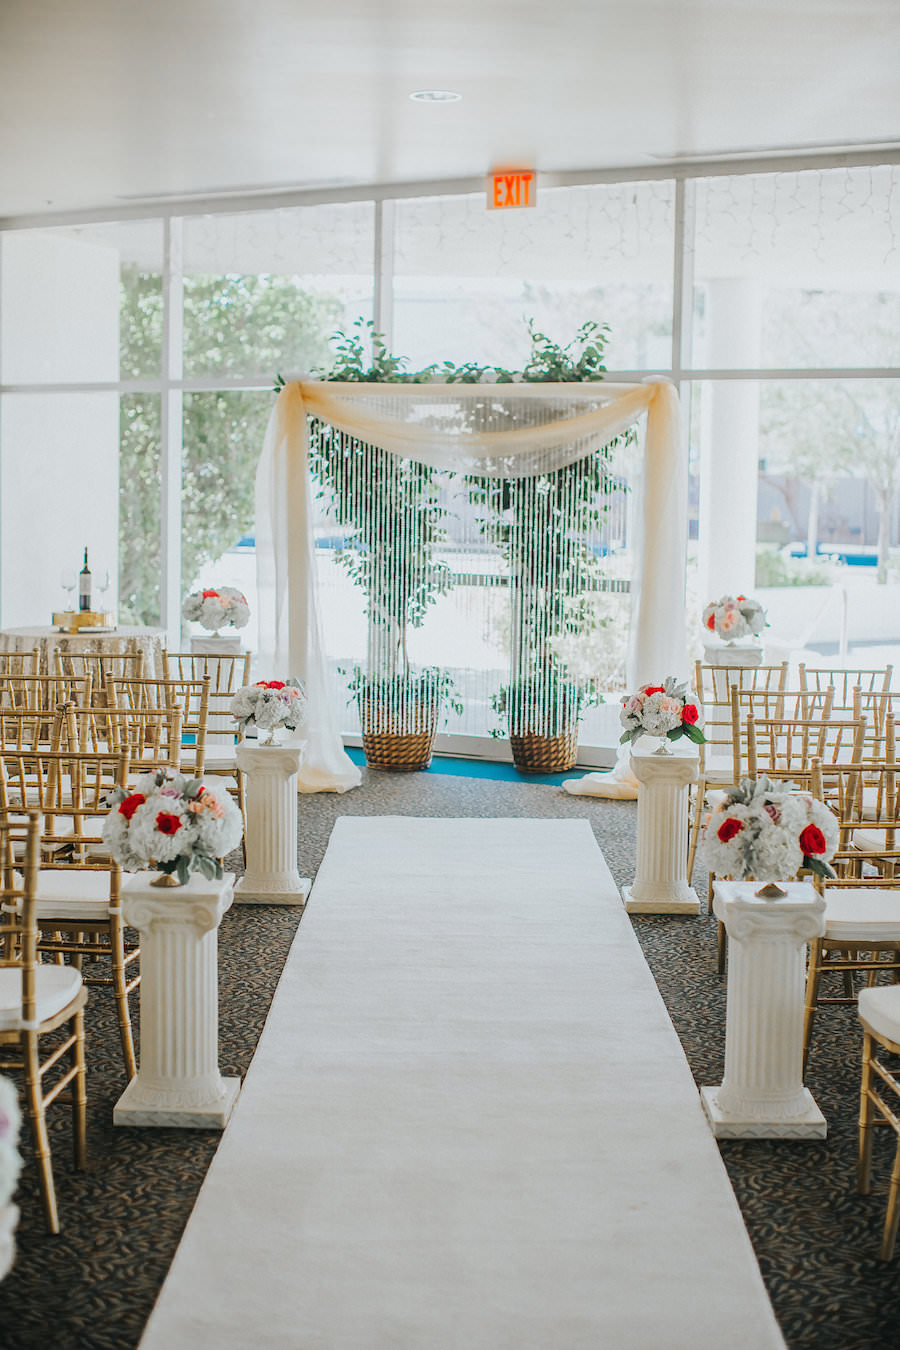 Wedding Ceremony Decor with Draped Arch, Aisle Runner and Columns with Red and White Floral Arrangements | Red and White Wedding Inspiration